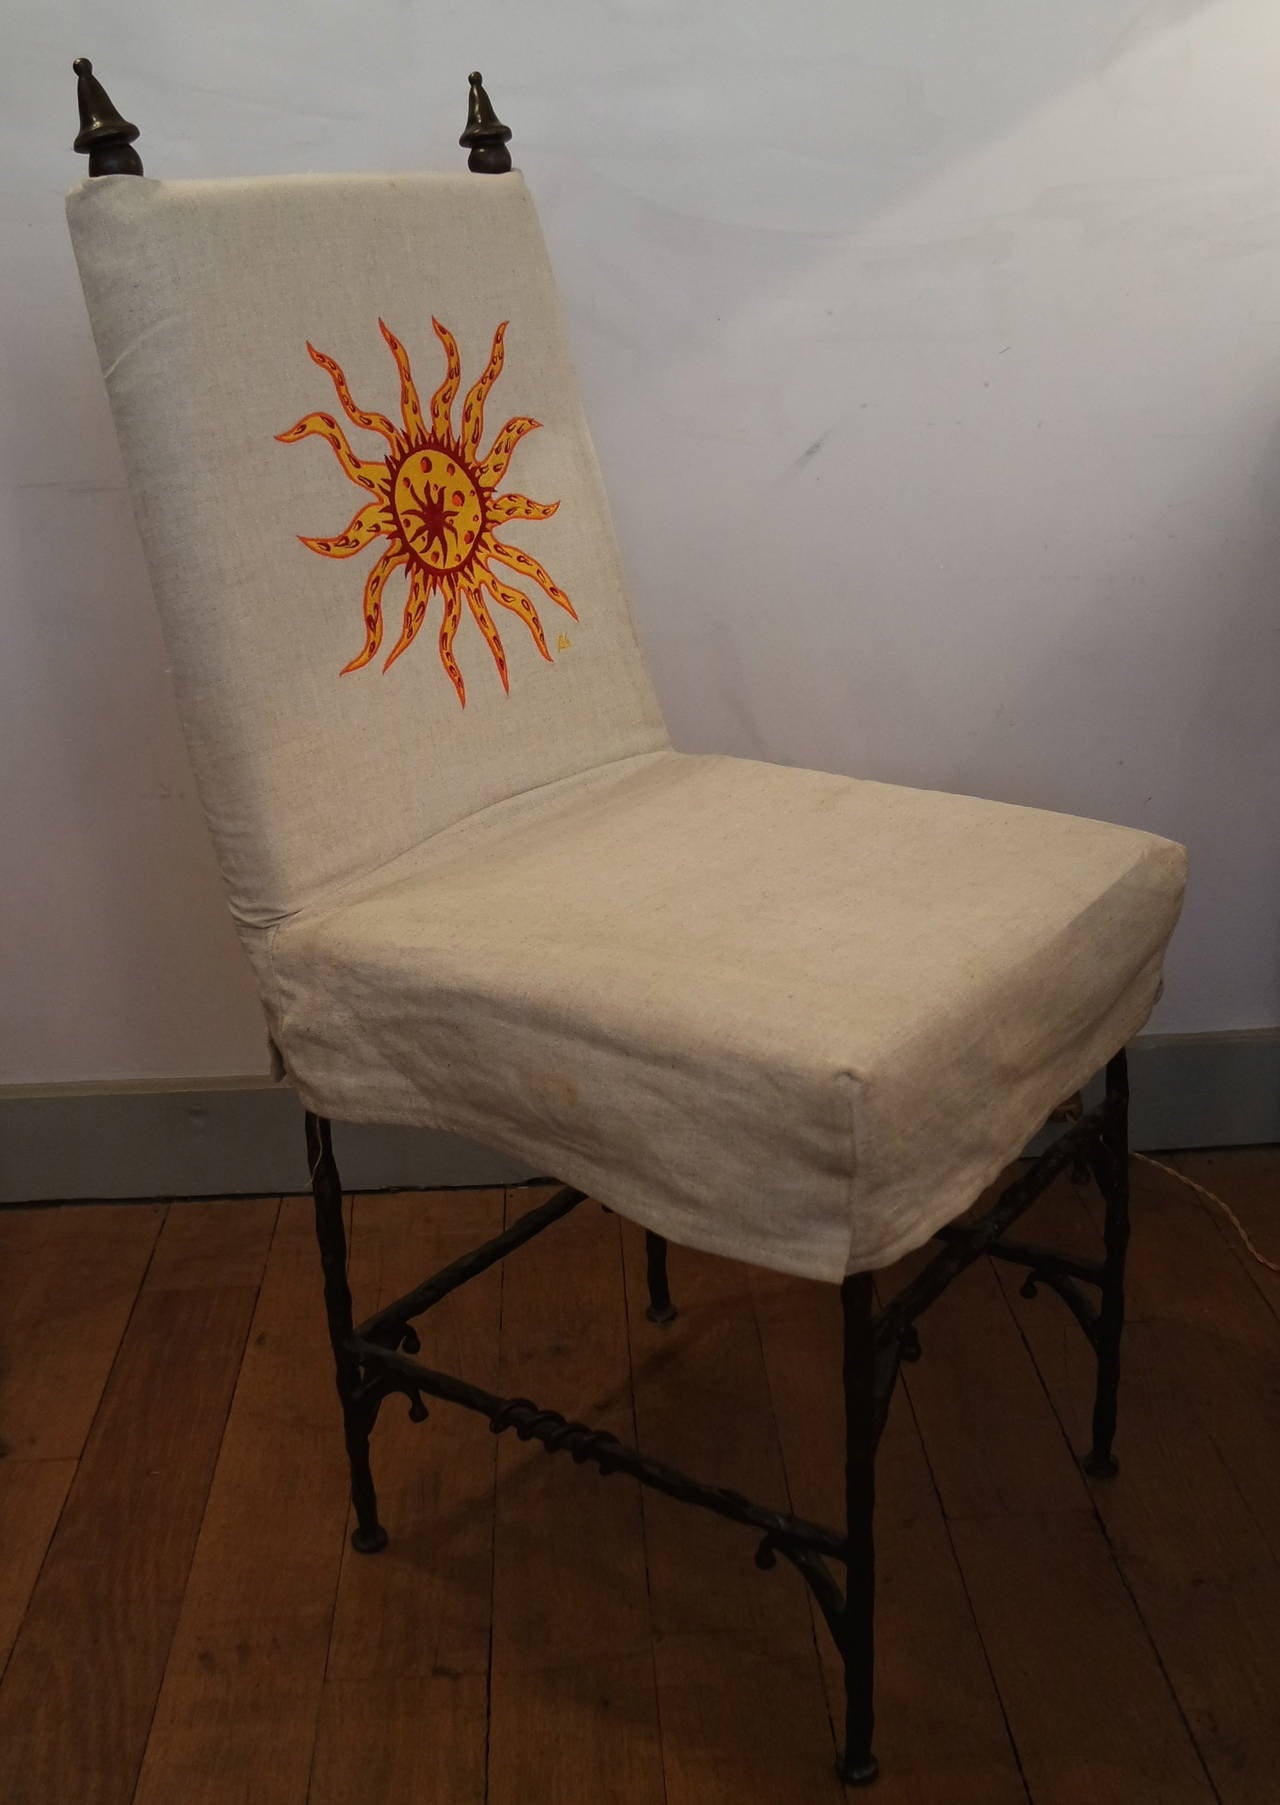 Famous Garouste & Bonetti Athéna metal chair design with the matching cover fabric, flame sun hand embroidery signed BG